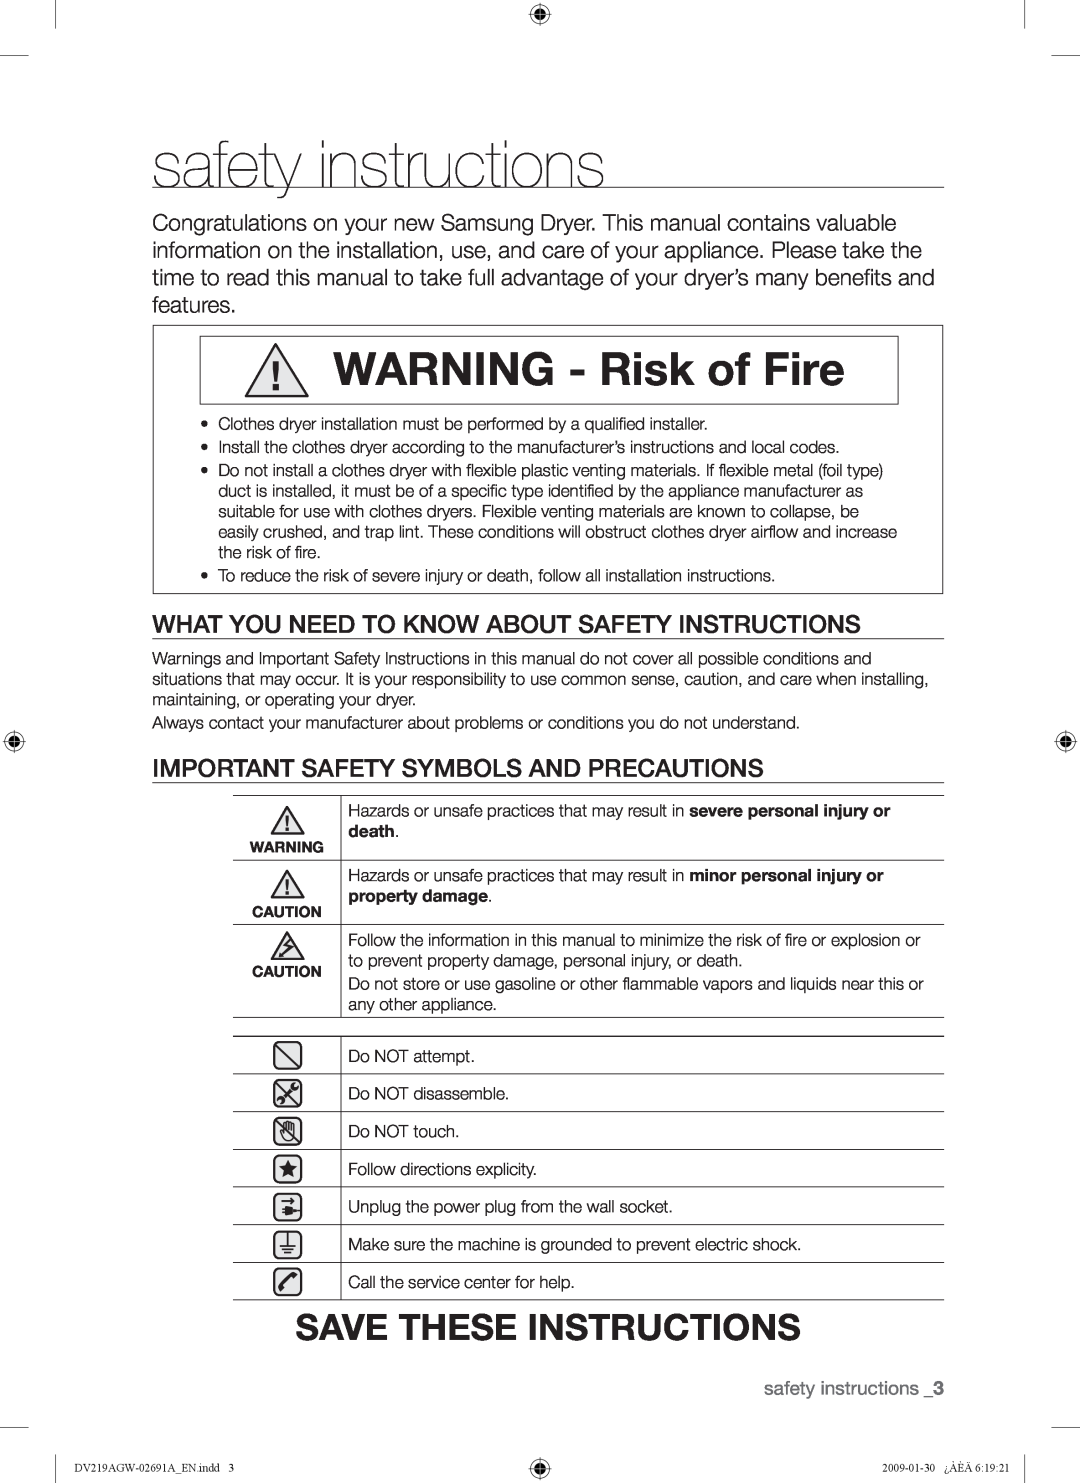 Samsung DV219AE*, DV219AGW safety instructions, Save These Instructions, What You Need To Know About Safety Instructions 